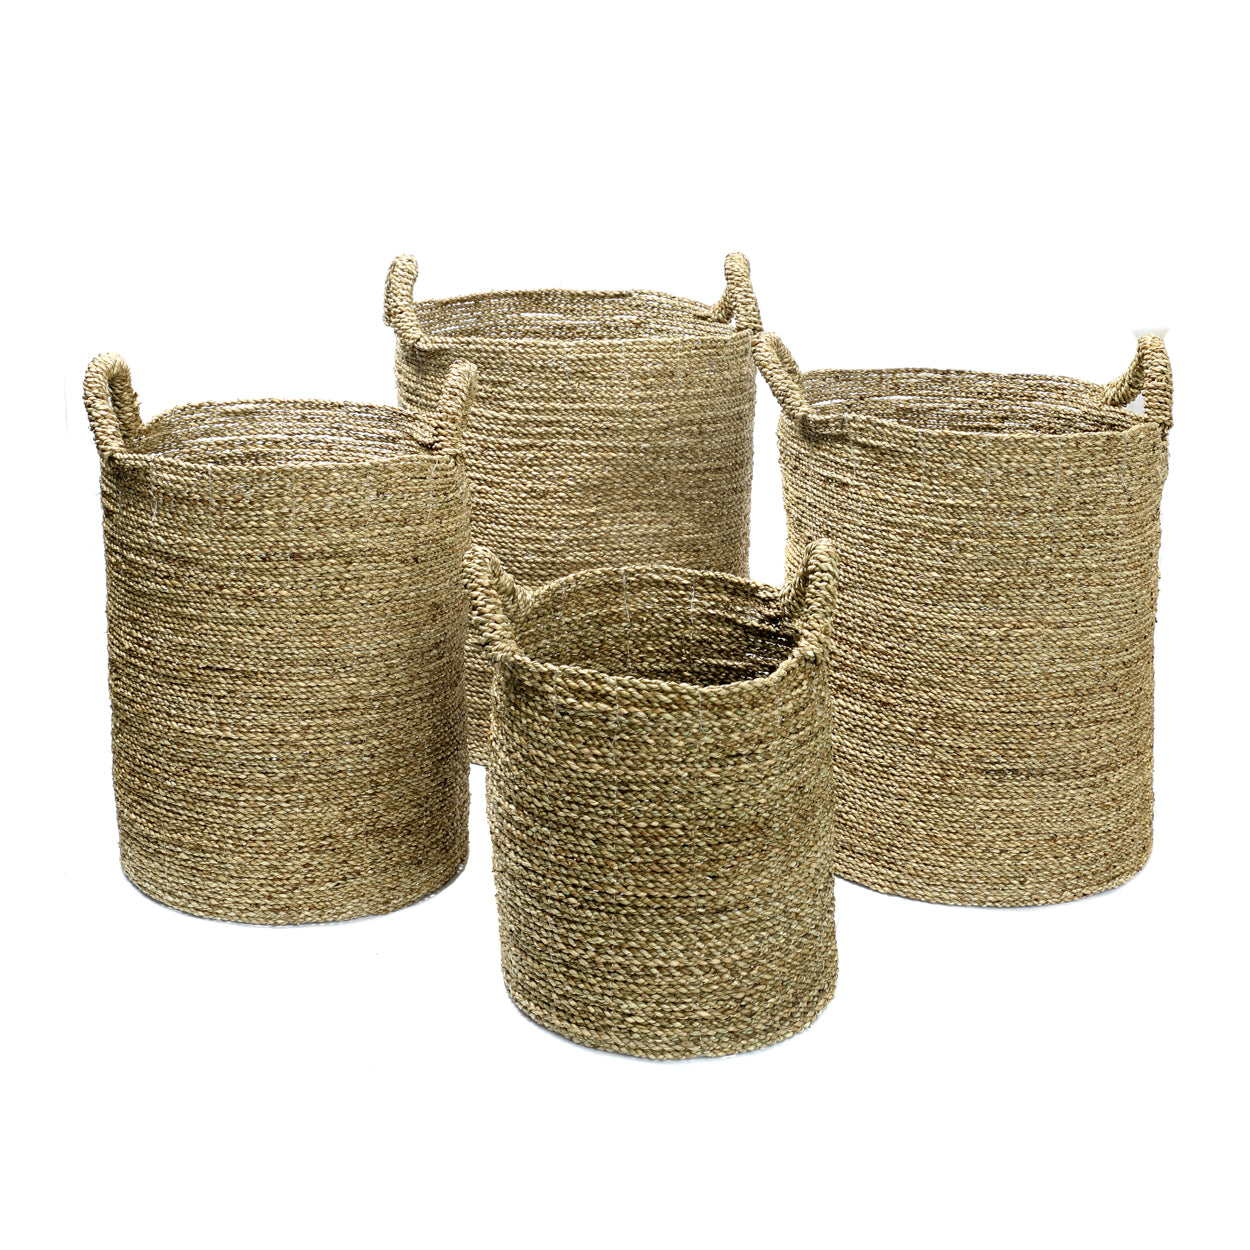 THE SENSITY Basket Set of 4 front view